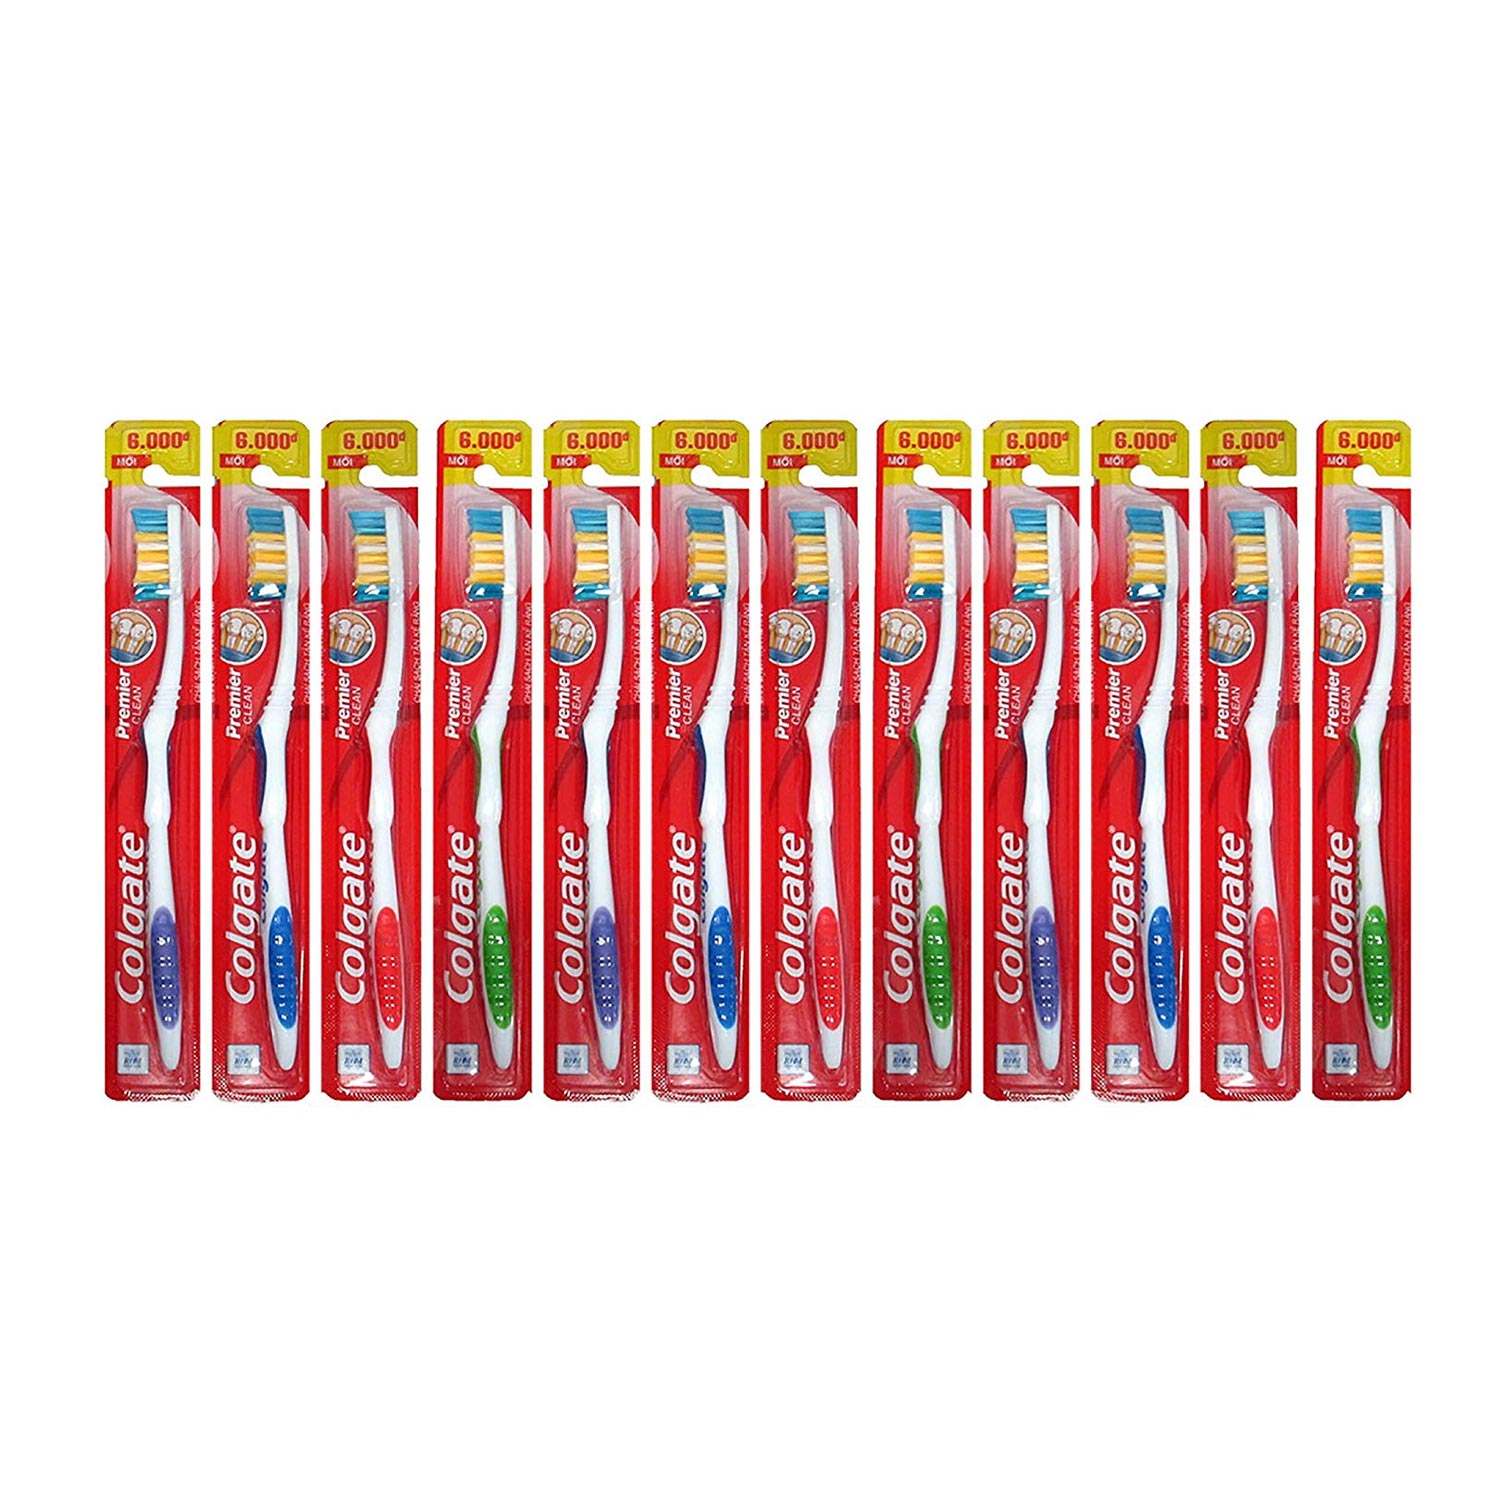 24-Pack Colgate Premier Extra Clean Toothbrushes $10.39